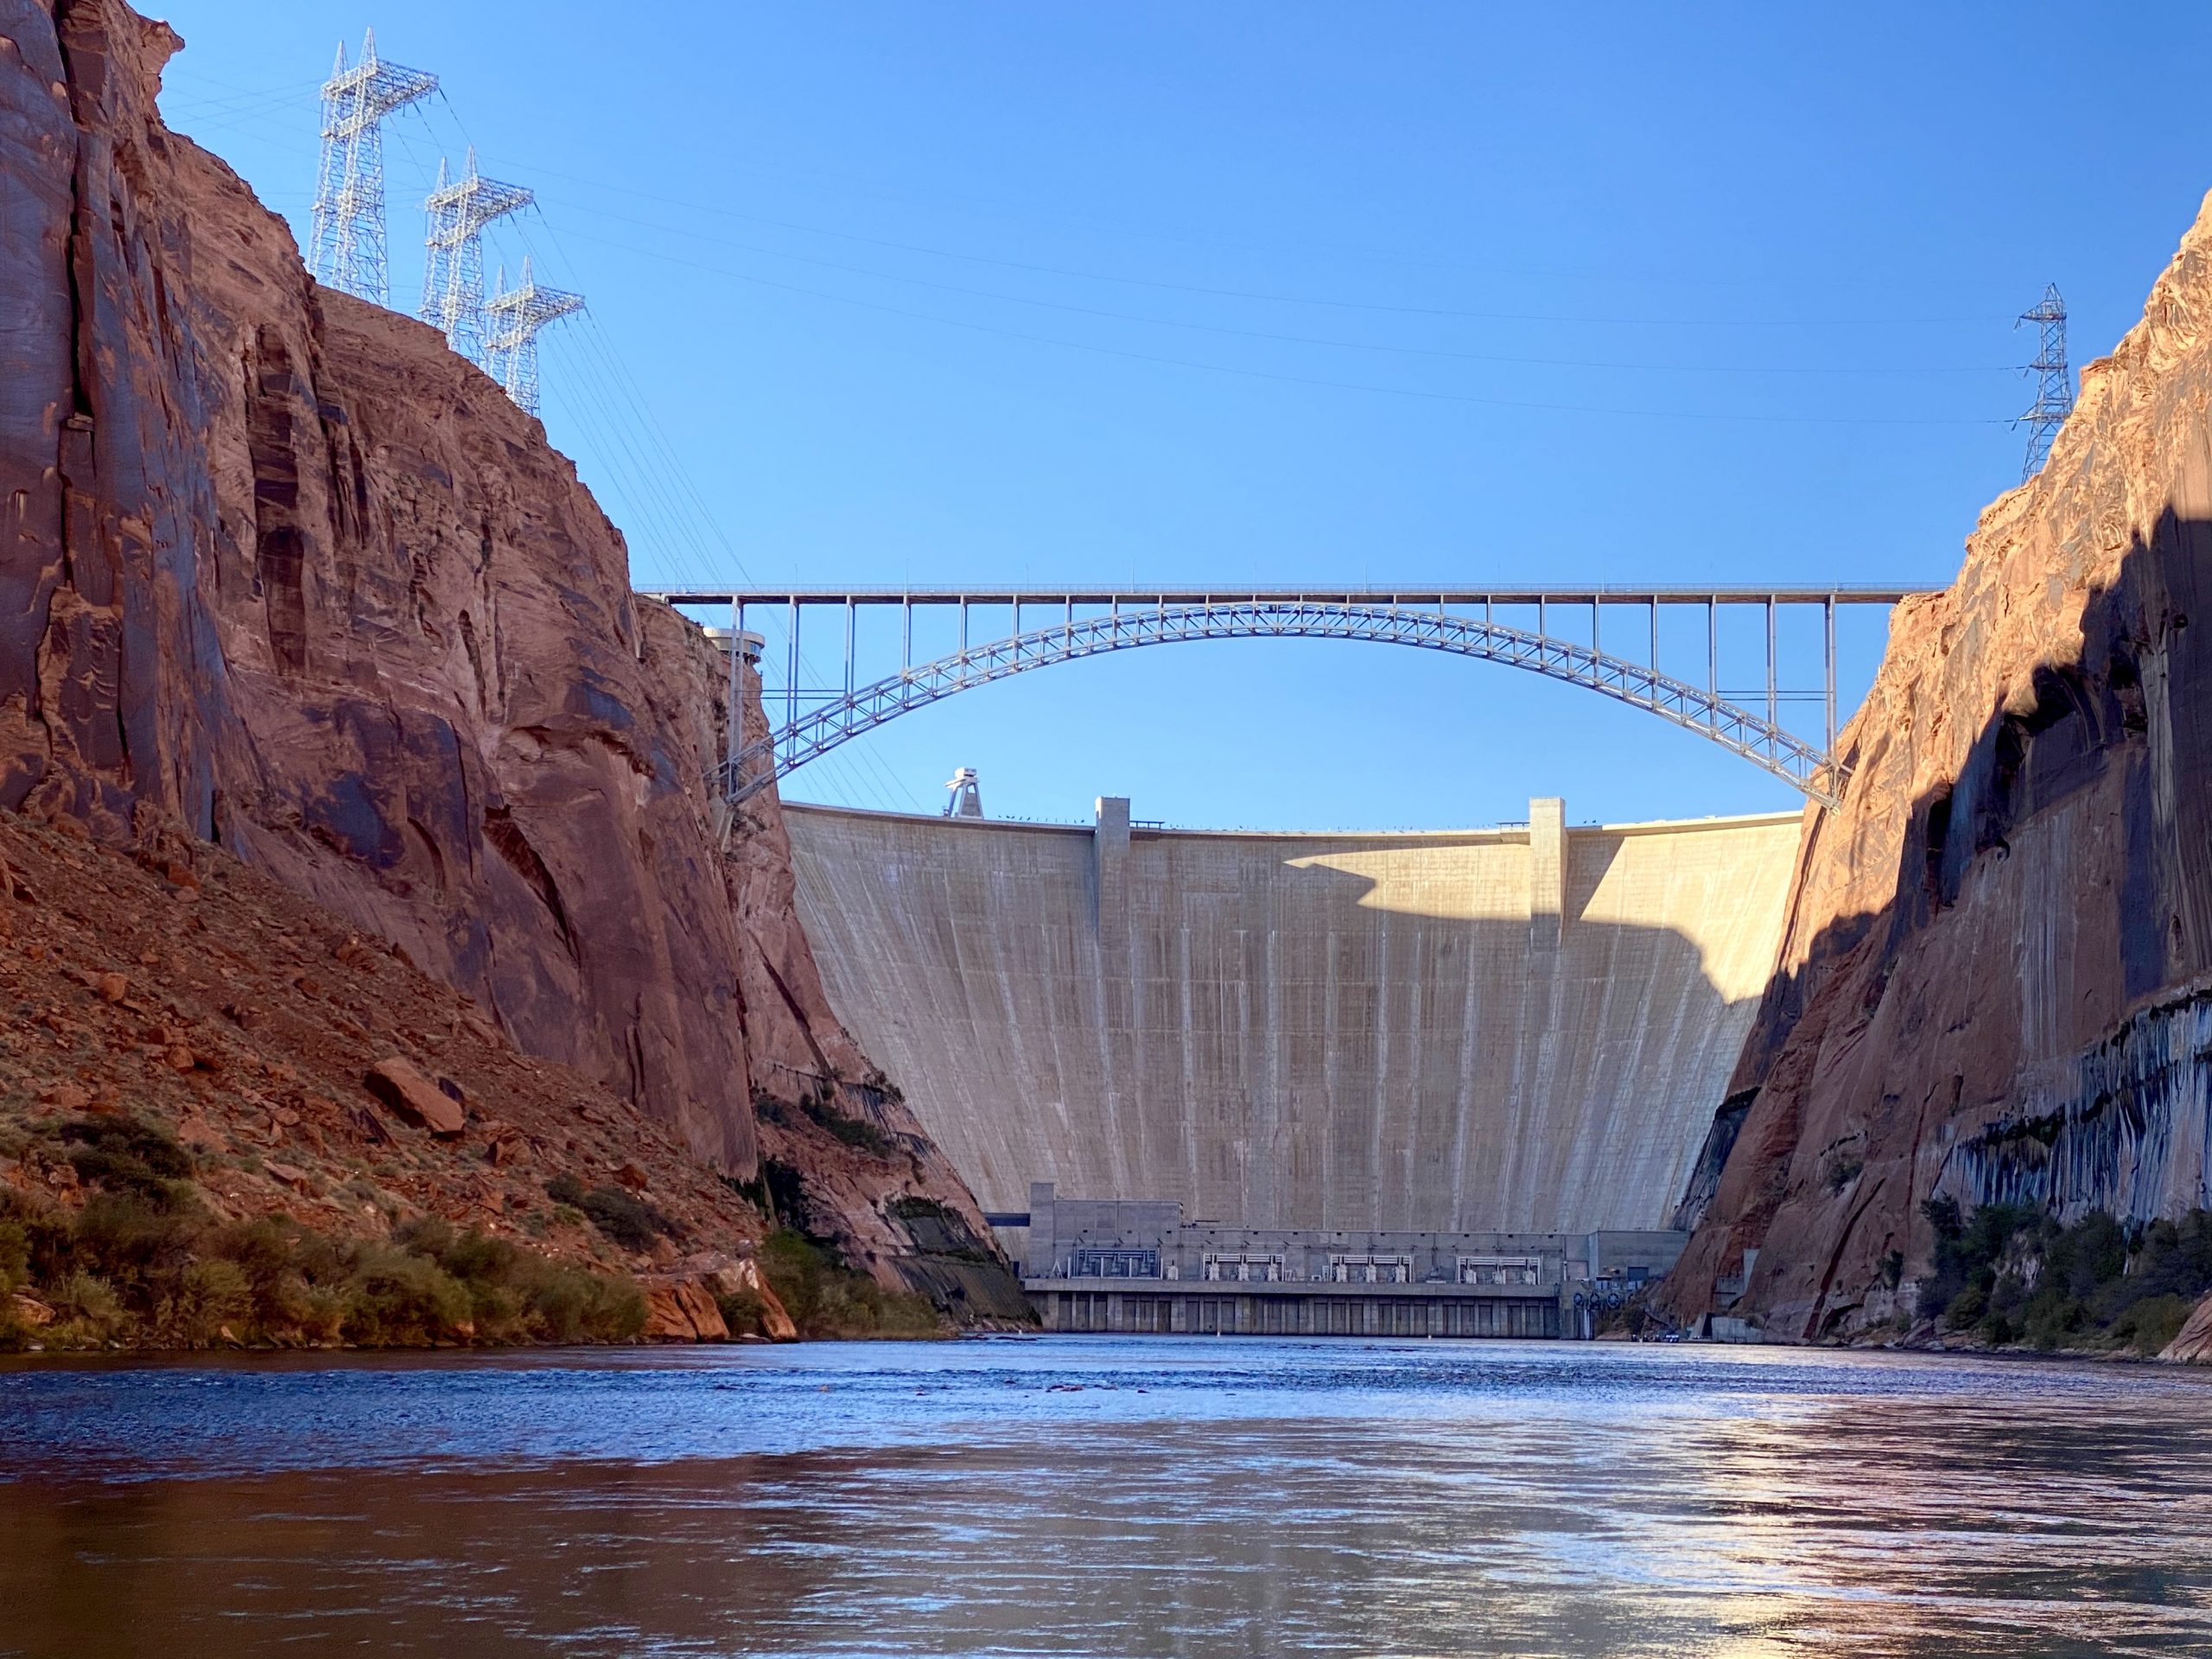 https://www.sustainablewaters.org/wp-content/uploads/2022/10/Glen-Canyon-Dam-scaled.jpeg